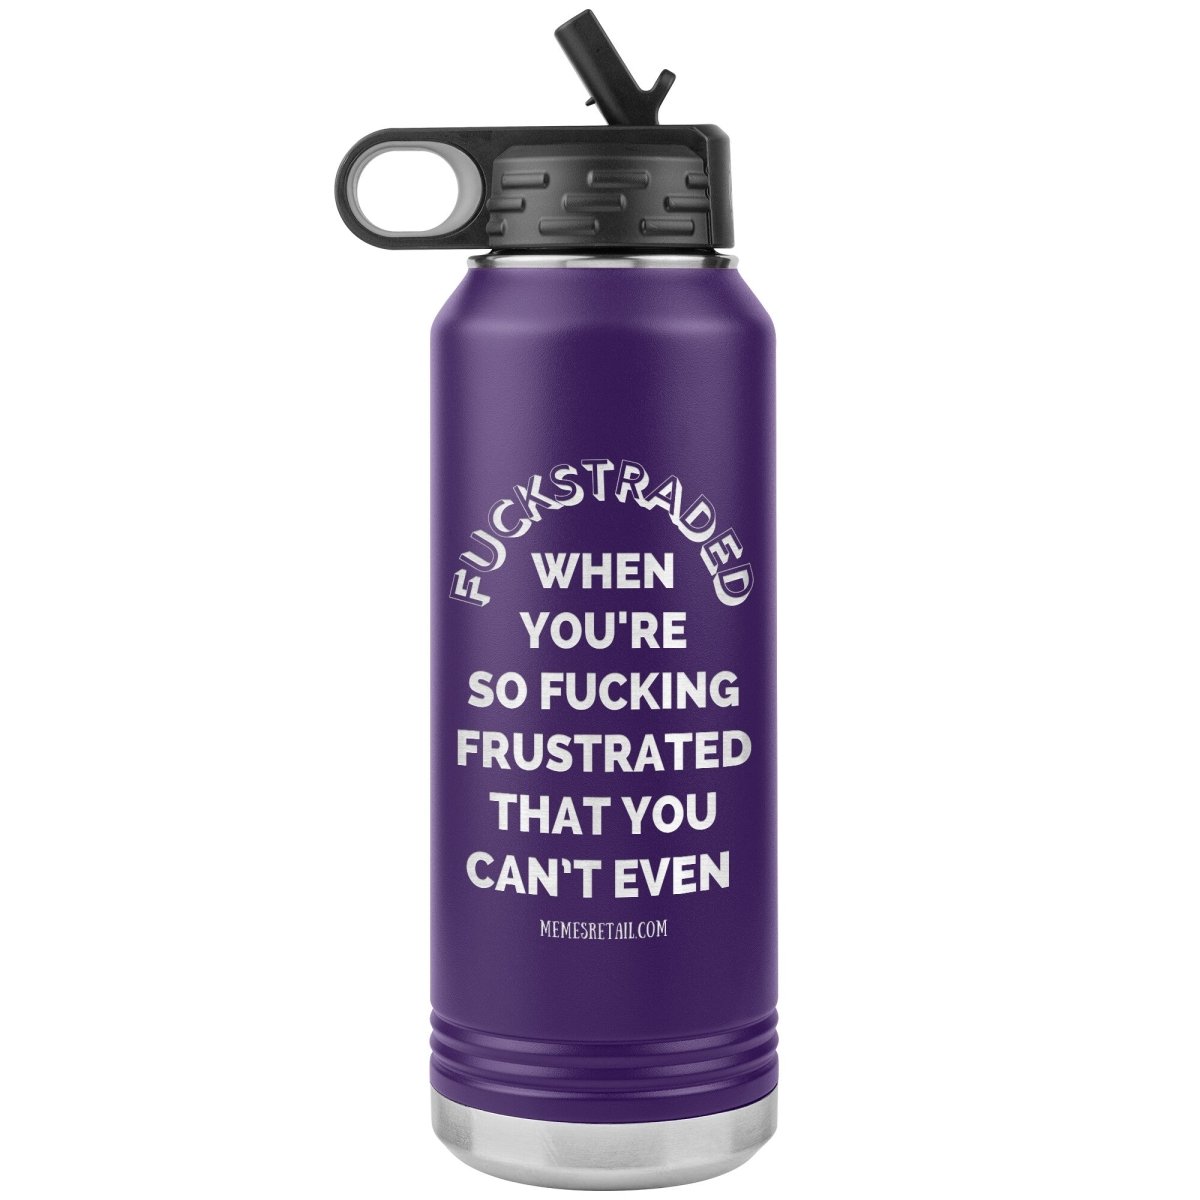 Fuckstraded, When You're So Fucking Frustrated That You Can’t Even - 32oz Water Tumblers, Purple - MemesRetail.com